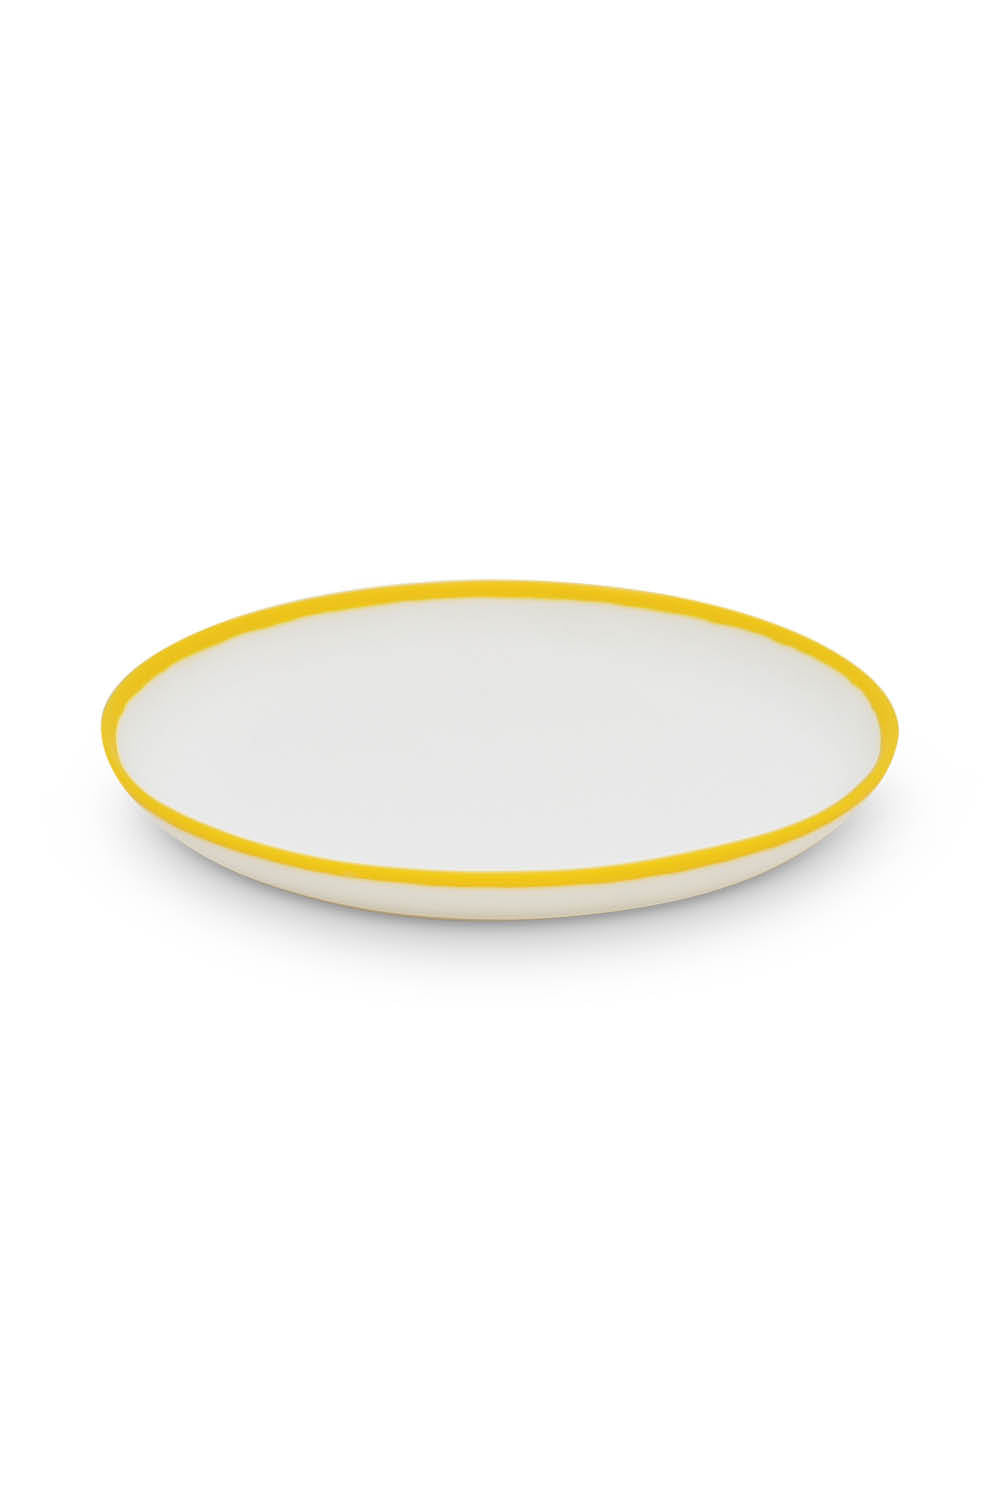 LIGNE Large Plate in White With Sunshine Yellow Rim